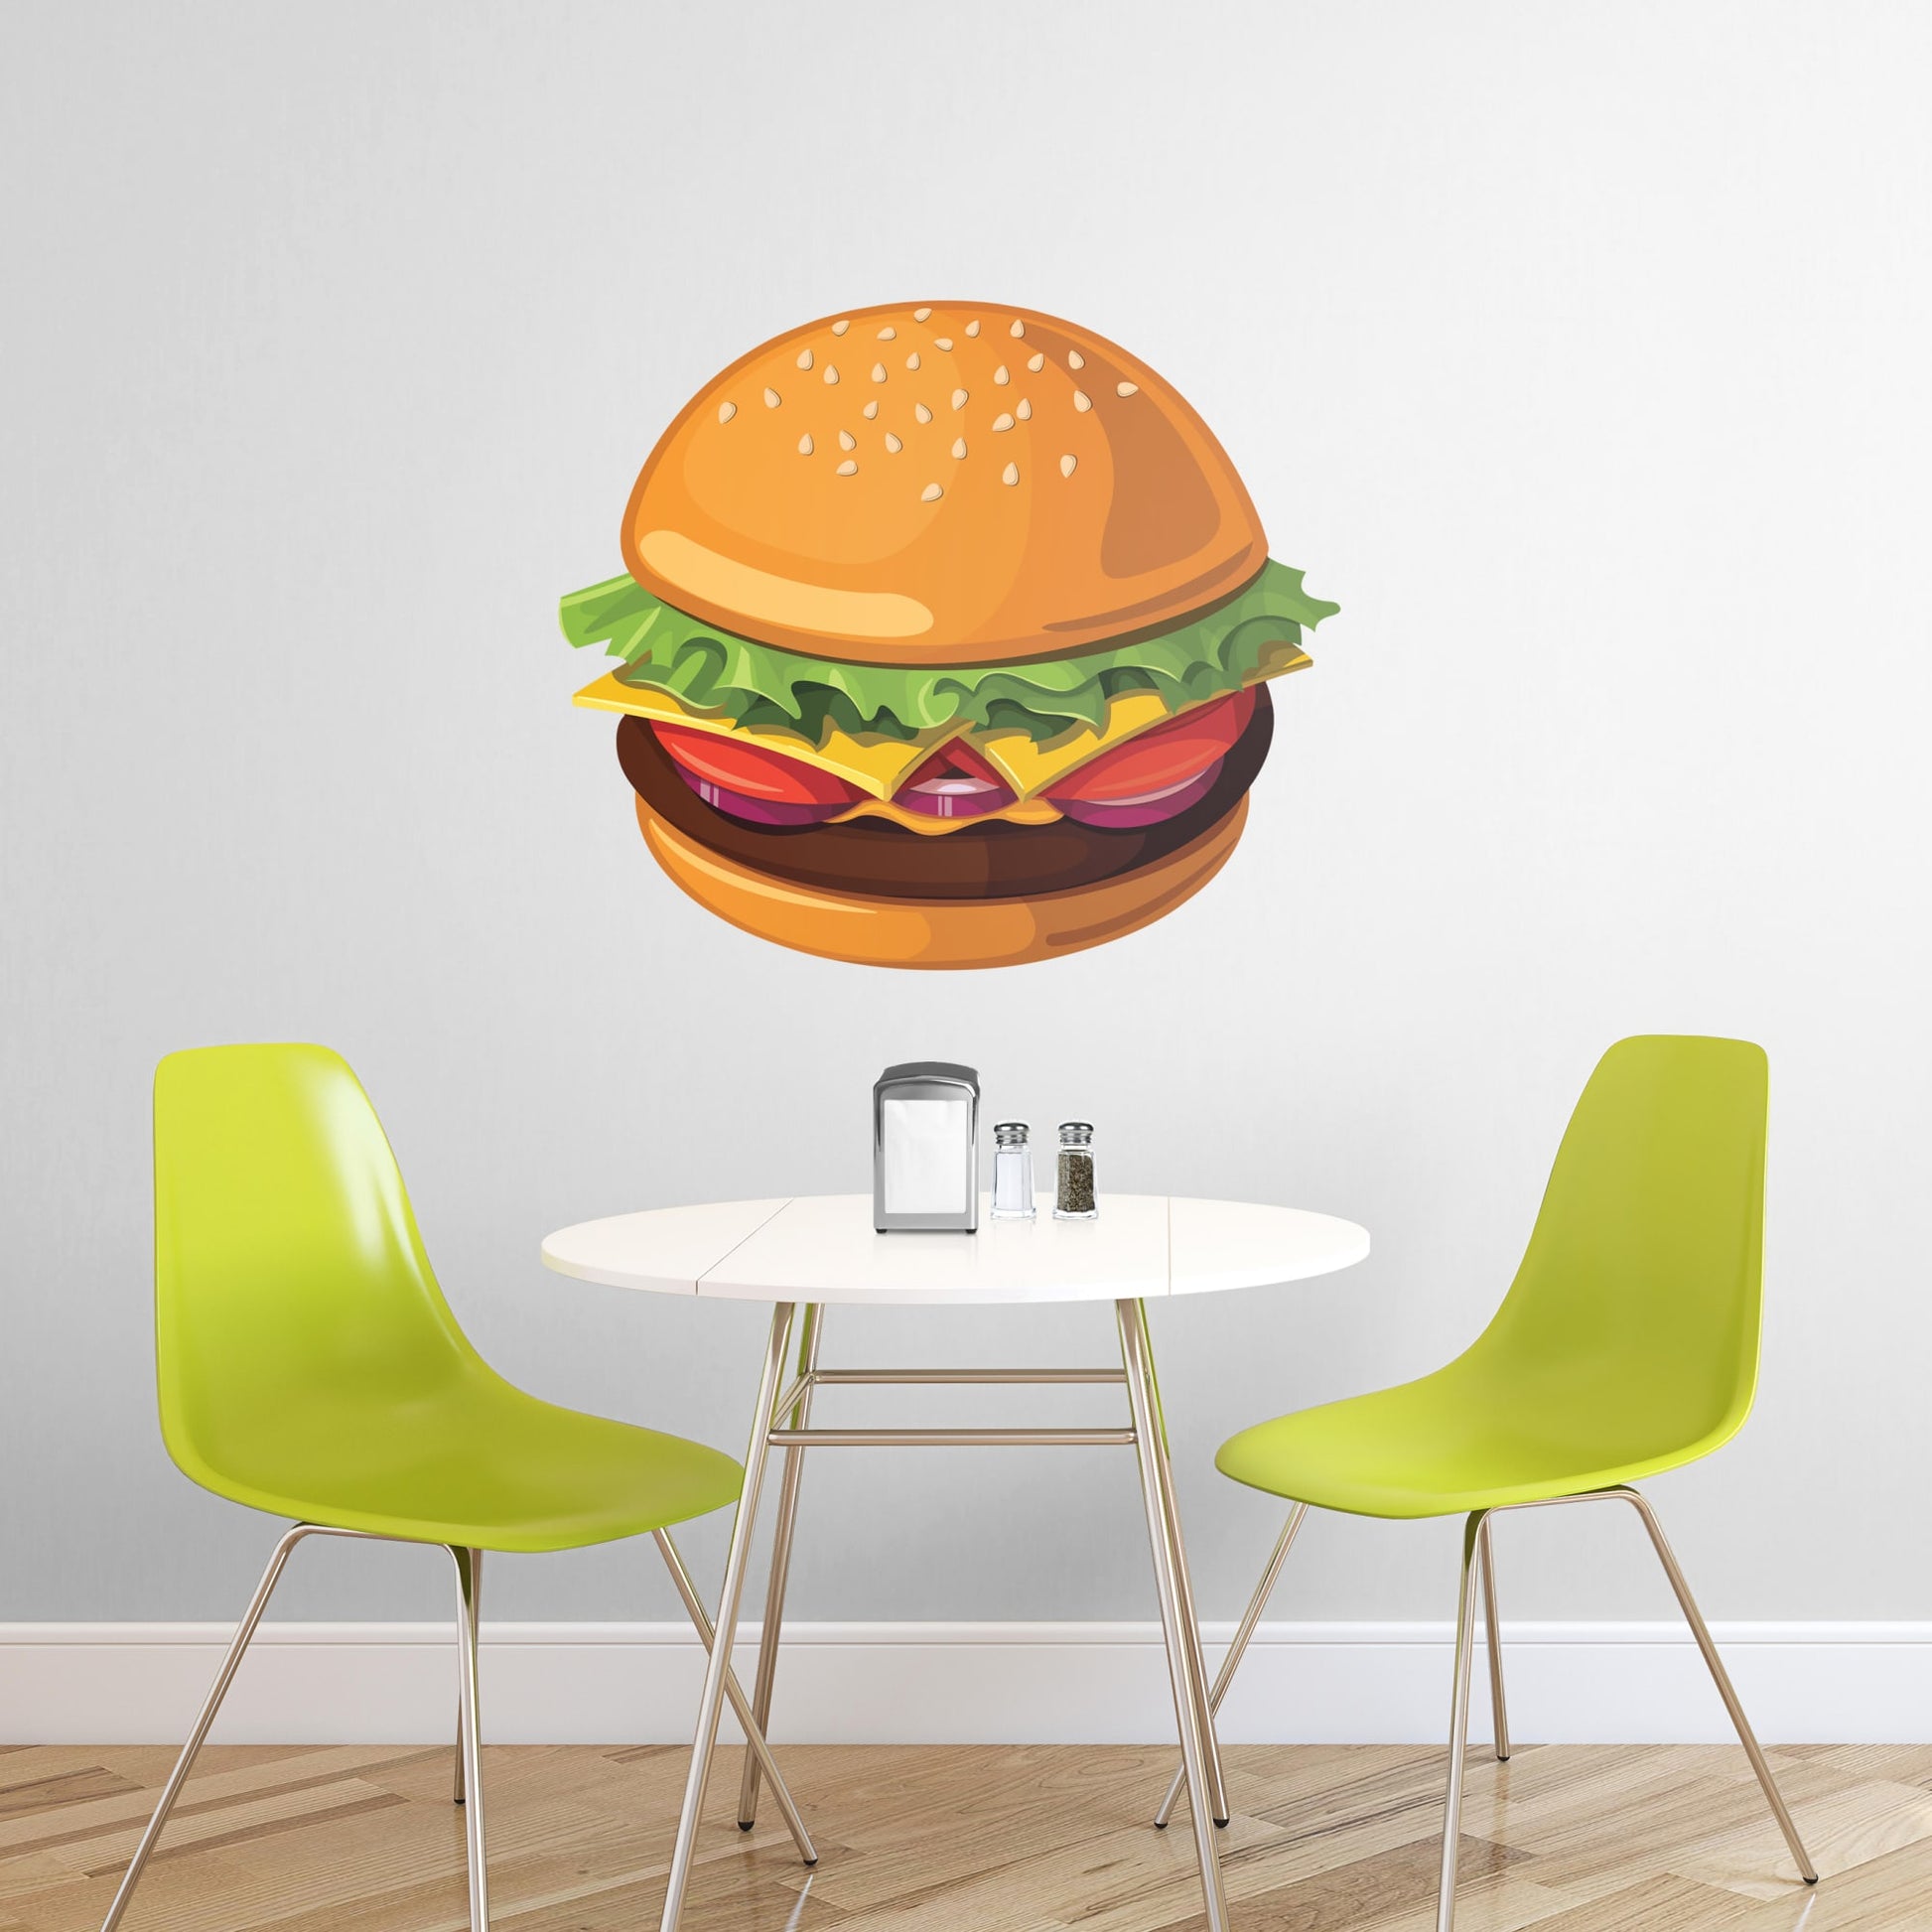 Giant Cheeseburger + 2 Decals (43"W x 37"H)